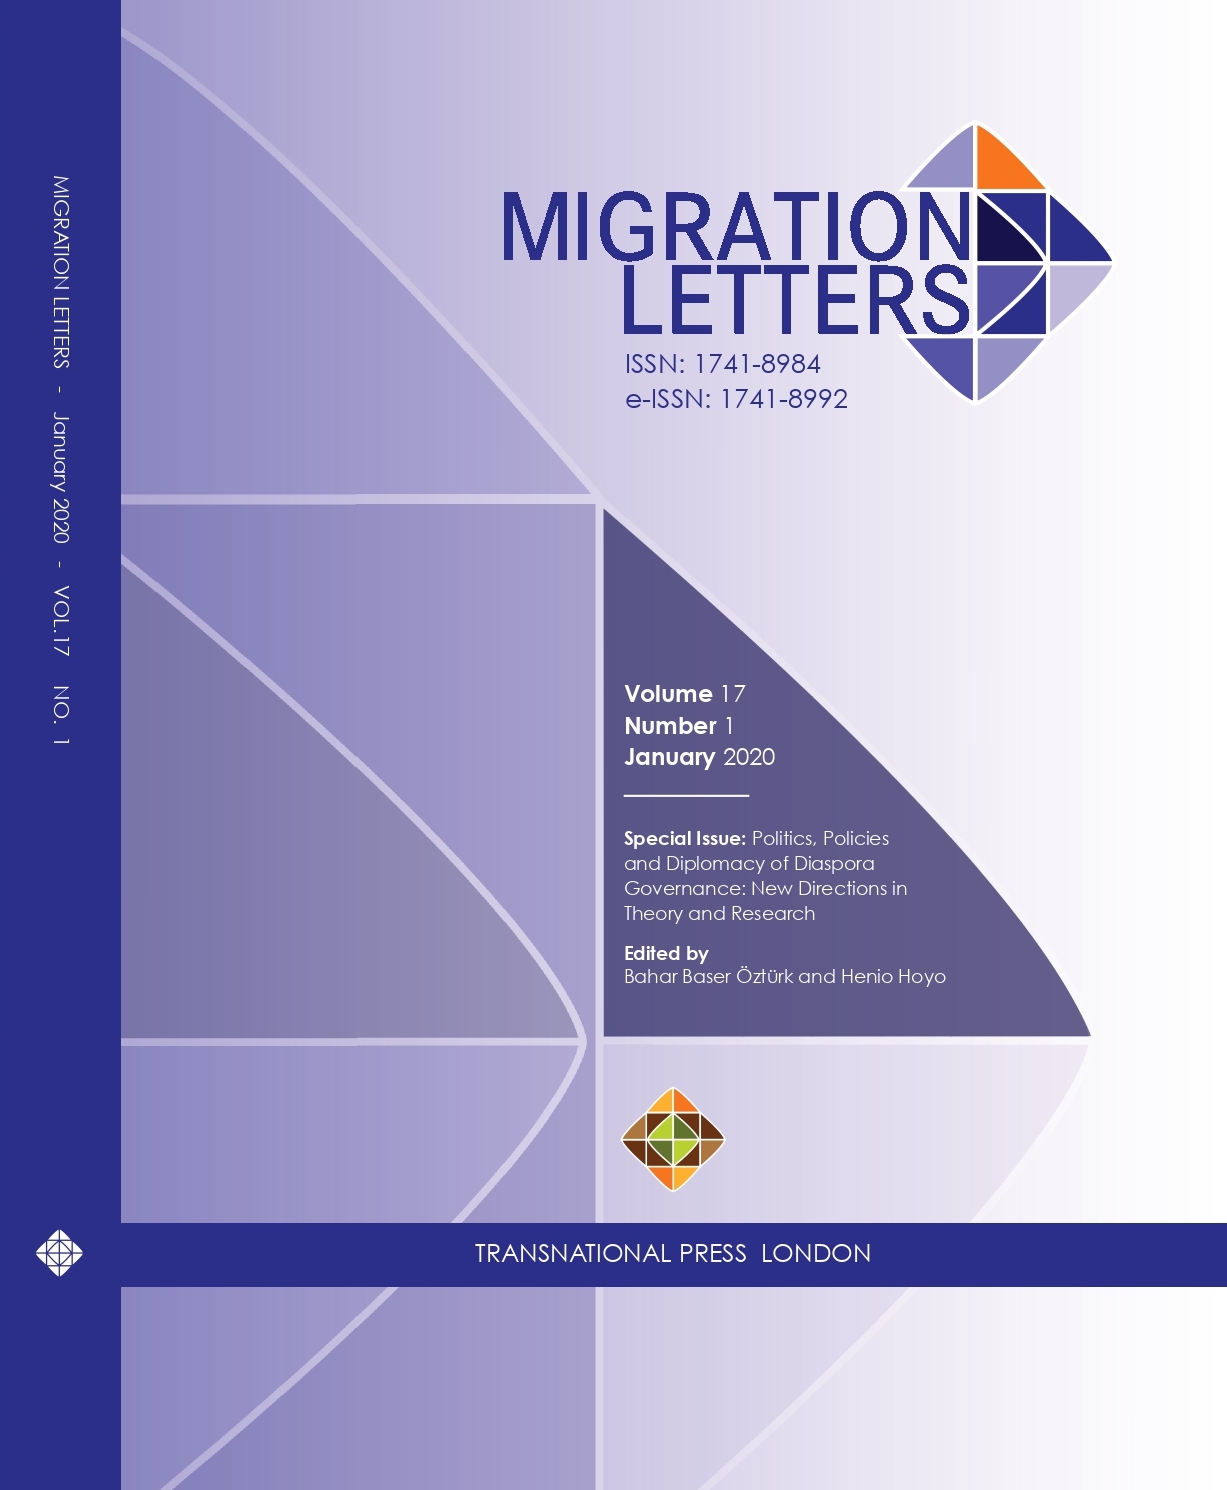 President Trump and Migration at 3 Cover Image